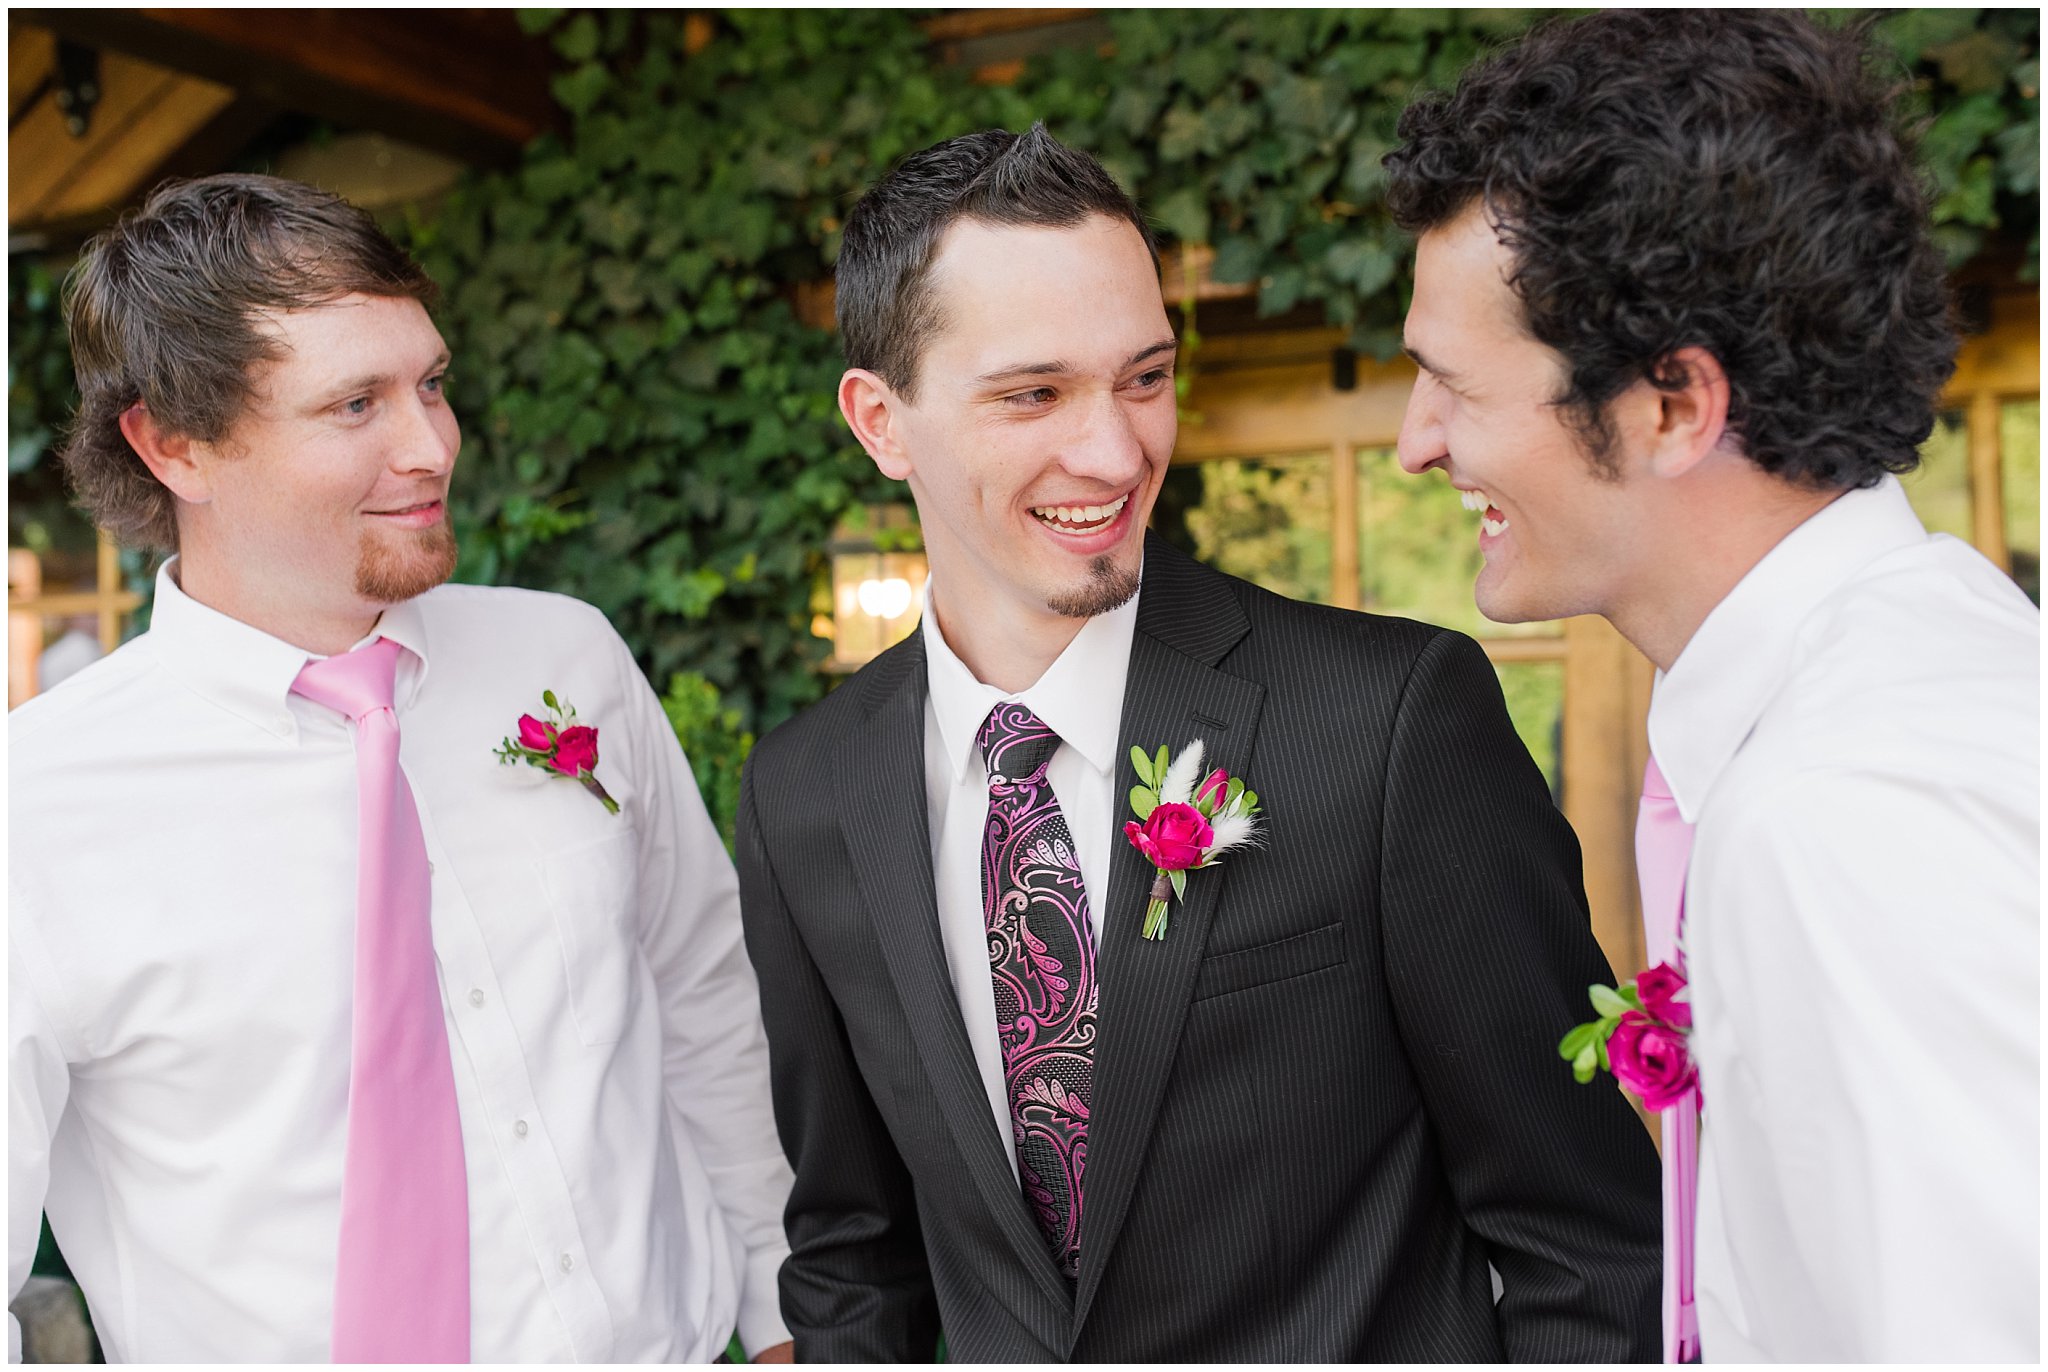 Groom with groomsmen laughing | Wadley Farms Summer Wedding | Jessie and Dallin Photography